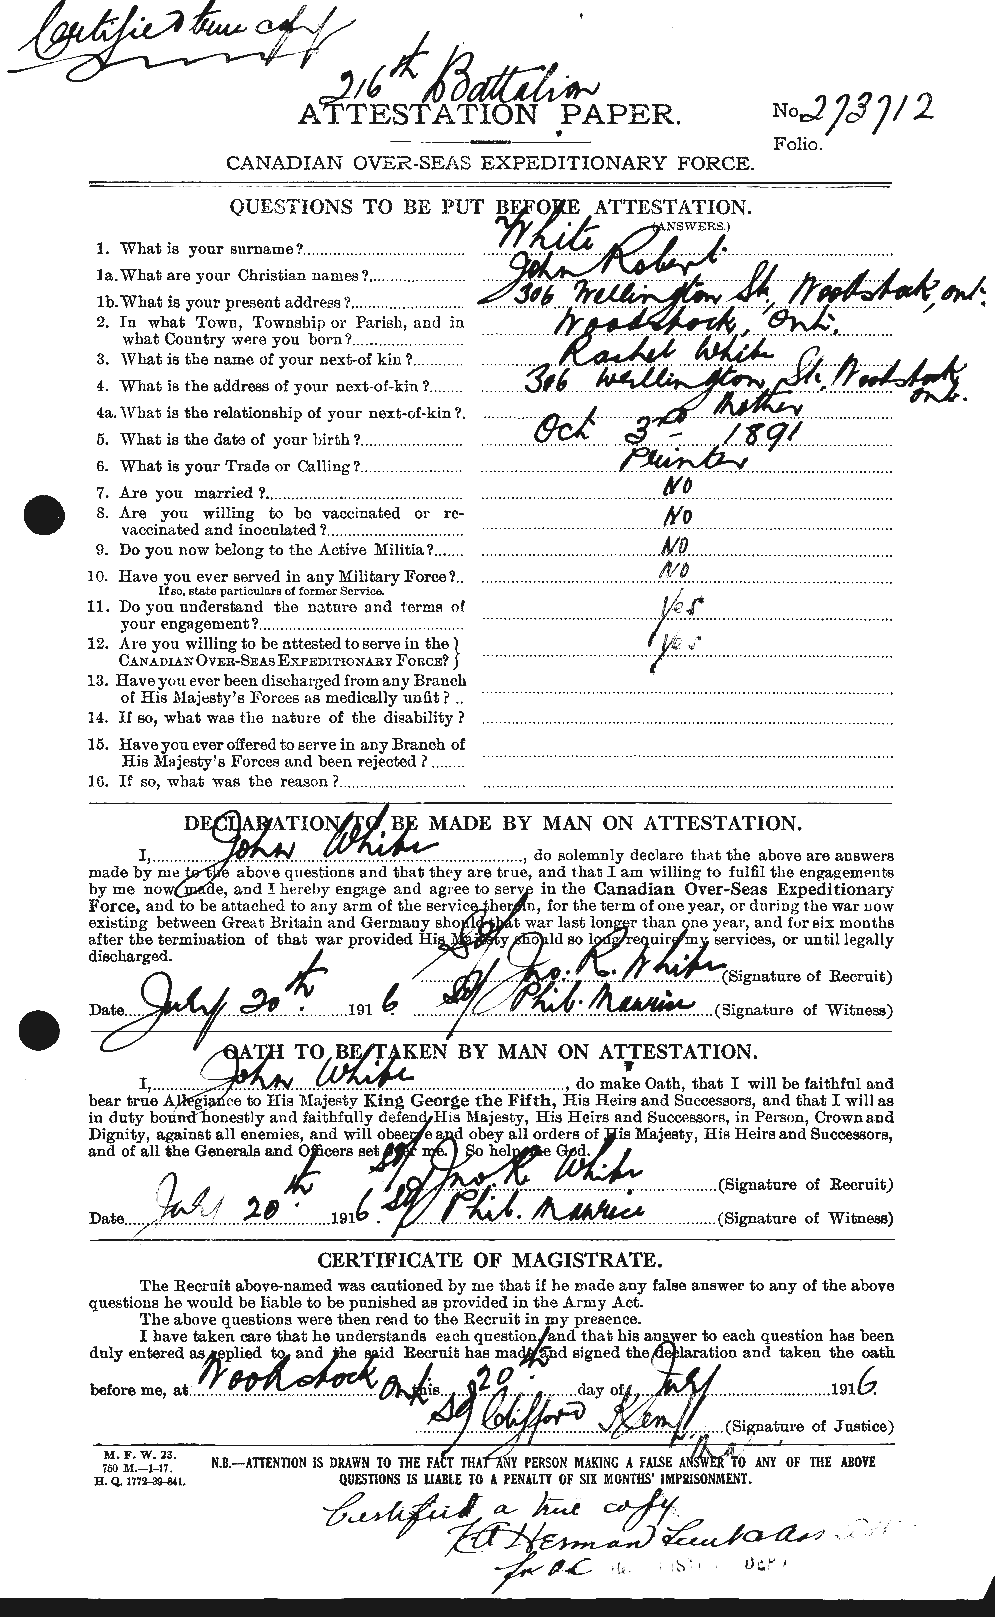 Personnel Records of the First World War - CEF 671593a